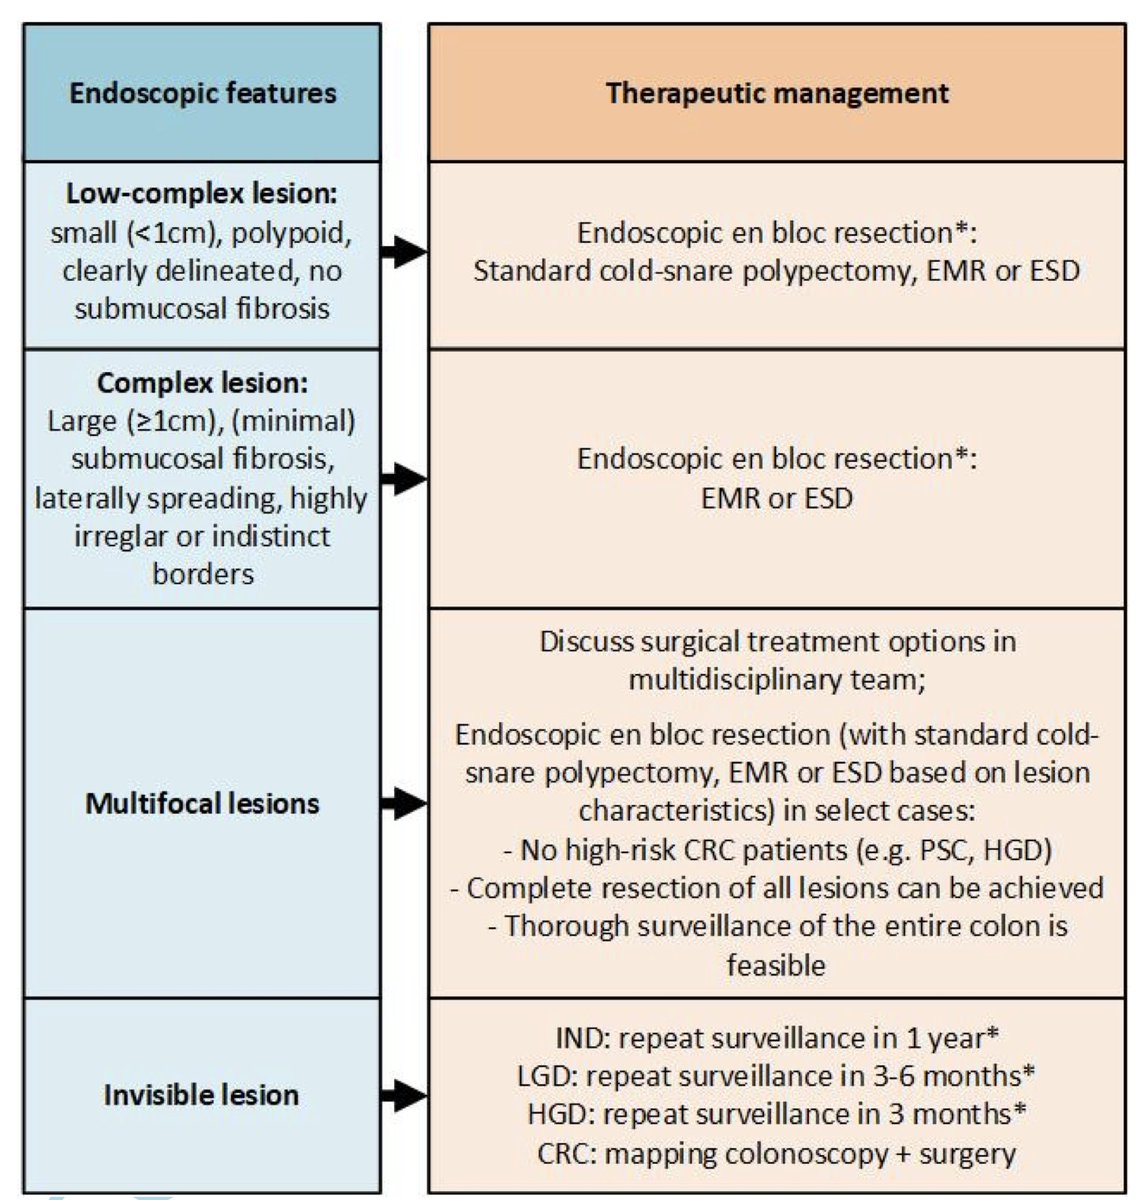 An up-to-date overview and future perspectives on #colorectal #neoplasia management and the subsequent surveillance strategies in #IBD patients. Derks et al. academic.oup.com/ecco-jcc/advan…